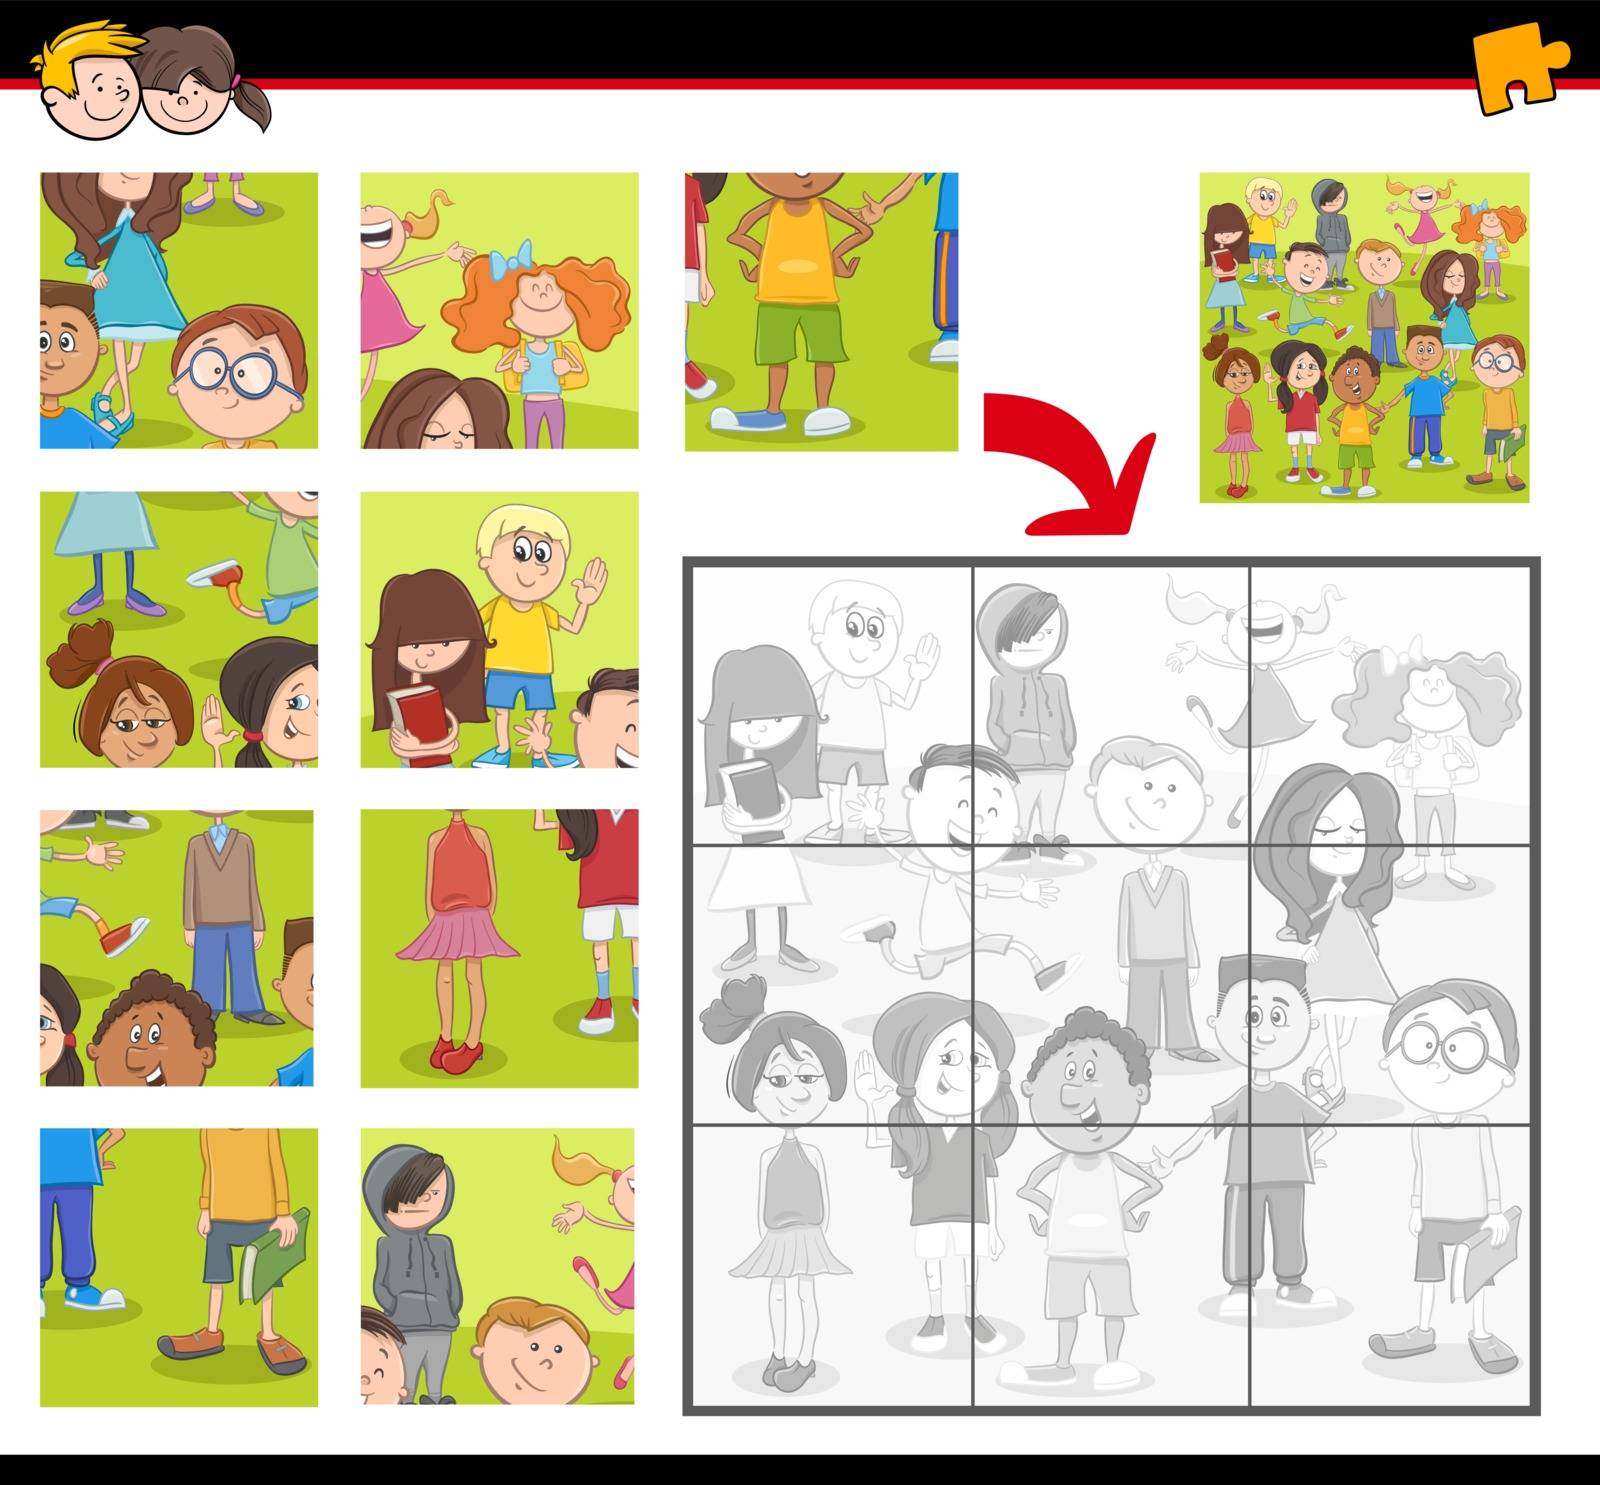 Cartoon Illustration of Education Jigsaw Puzzle Activity for Preschool Children with Teen Kid Characters